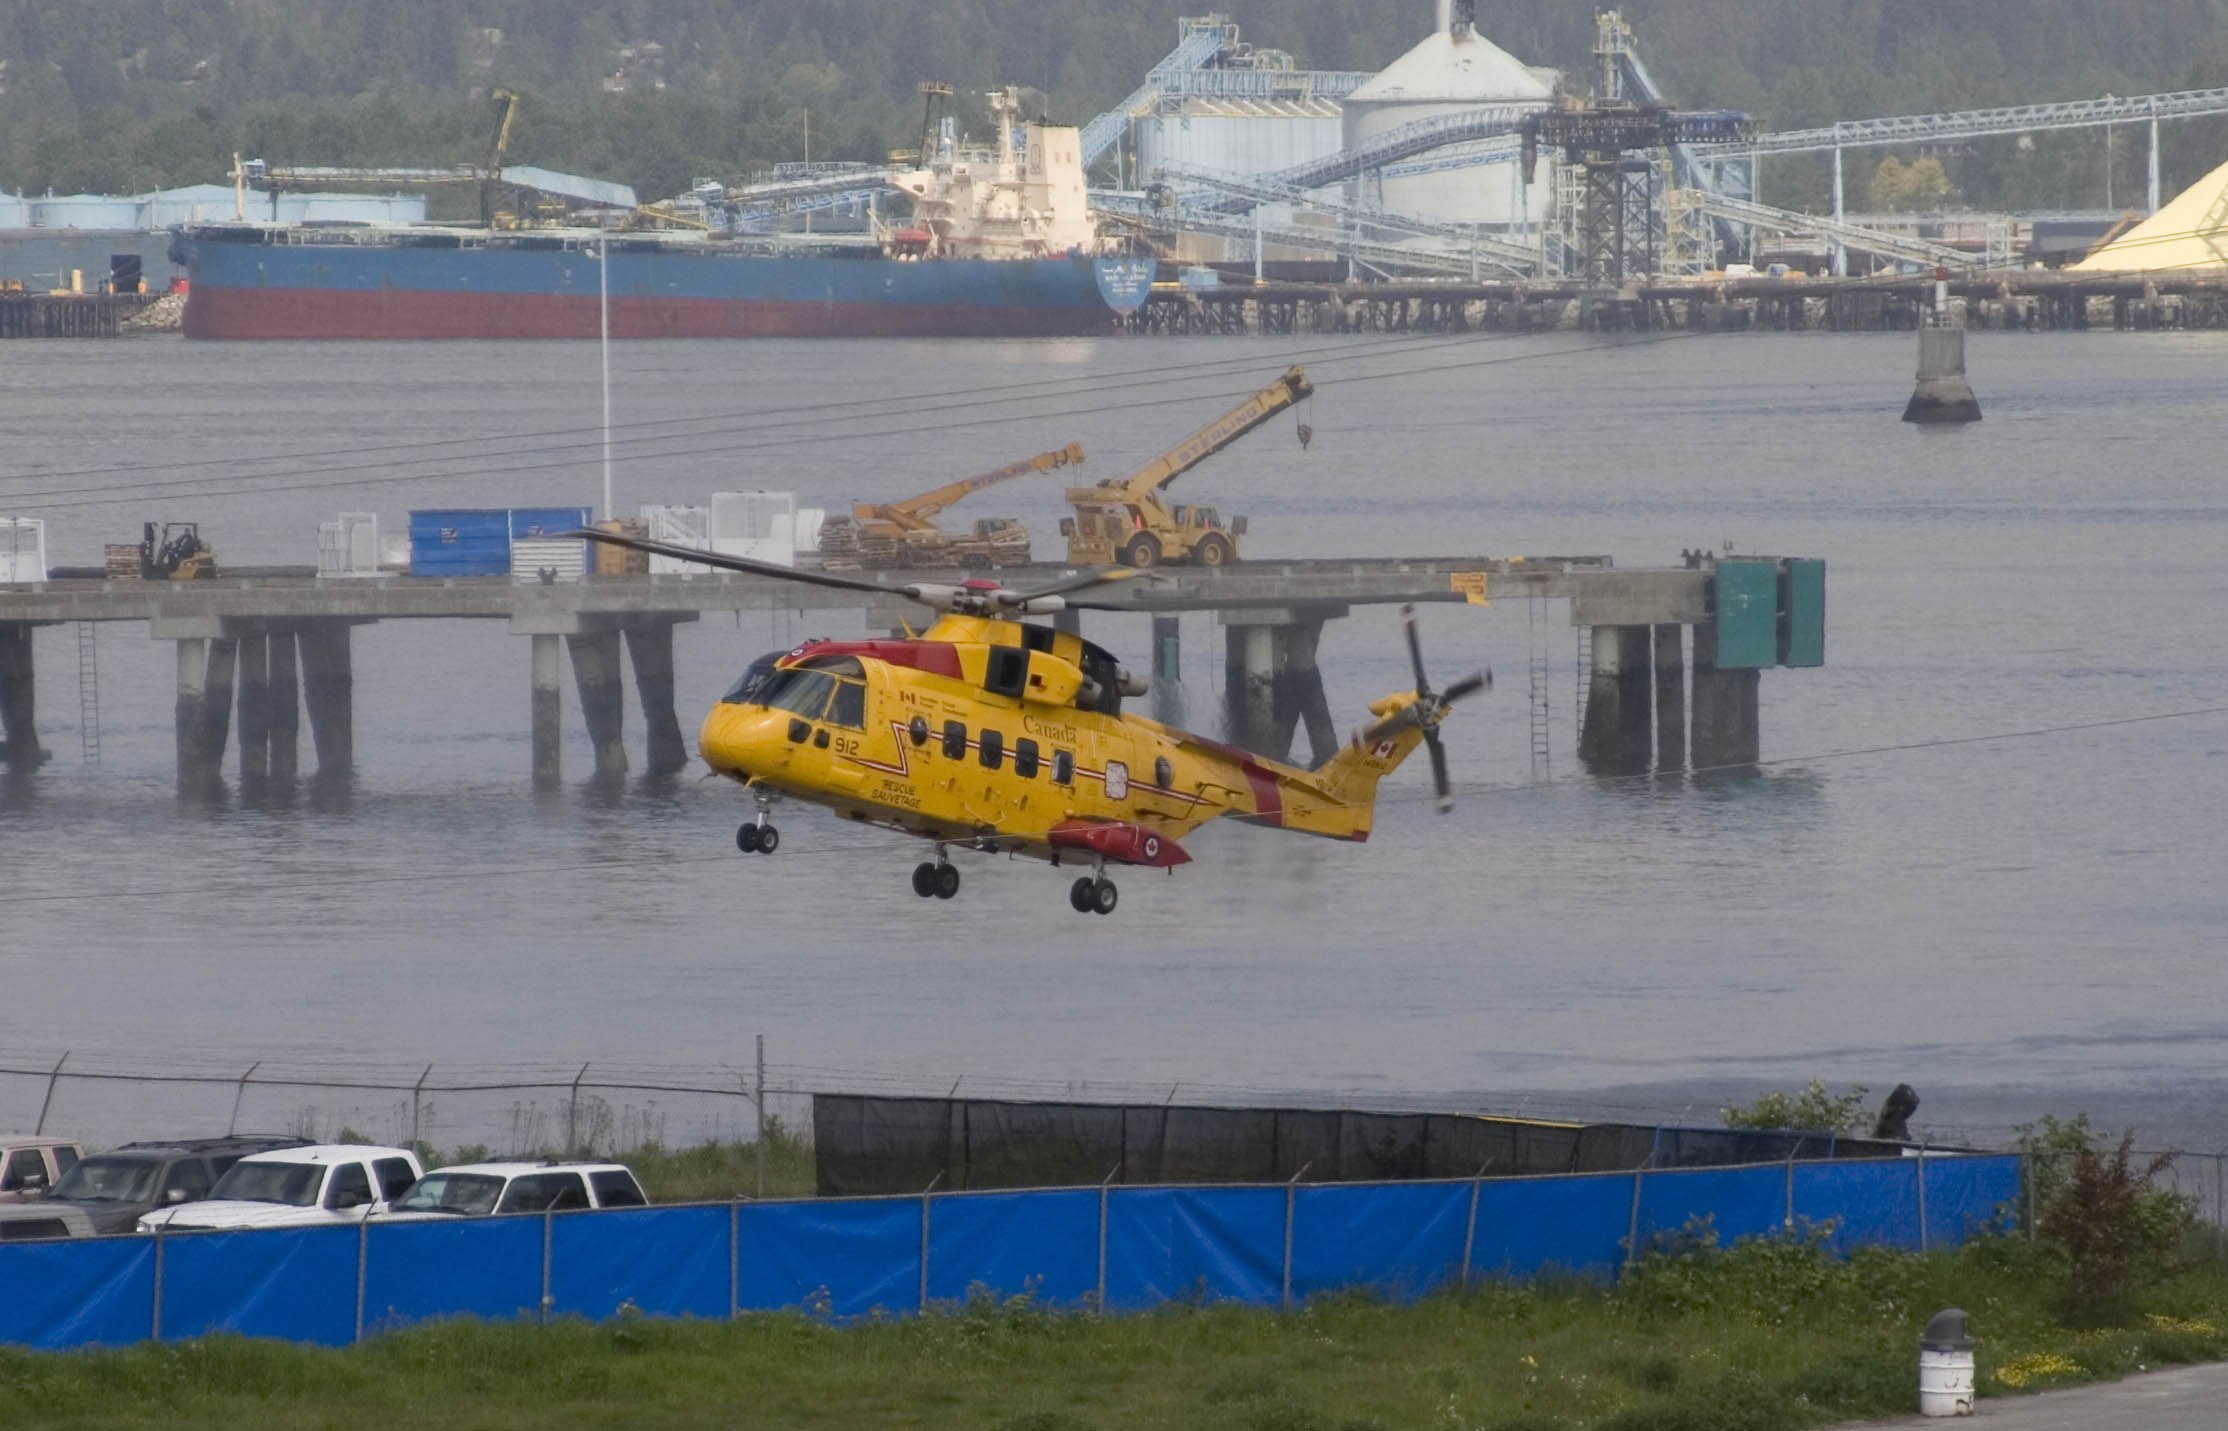 Rescue_912_CH-149_Cormorant_Helicopter_Lands_in_Vancouver.jpg